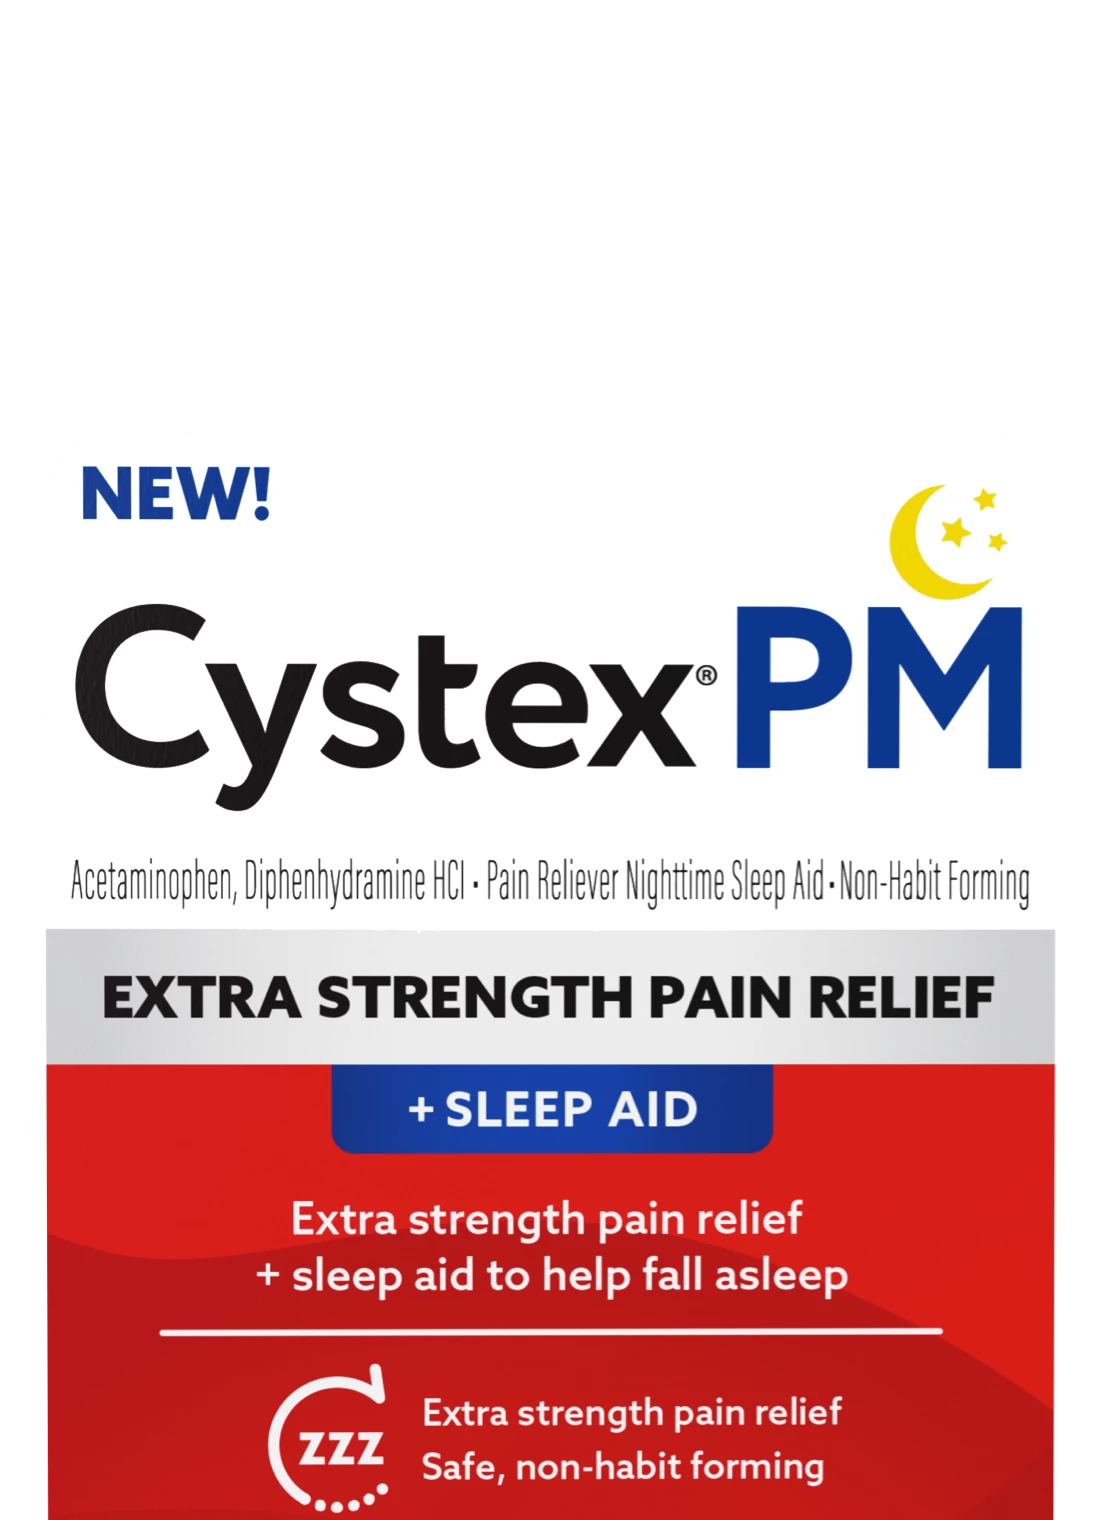 Cystex PM Extra Strength Pain Relief + Sleep Aid